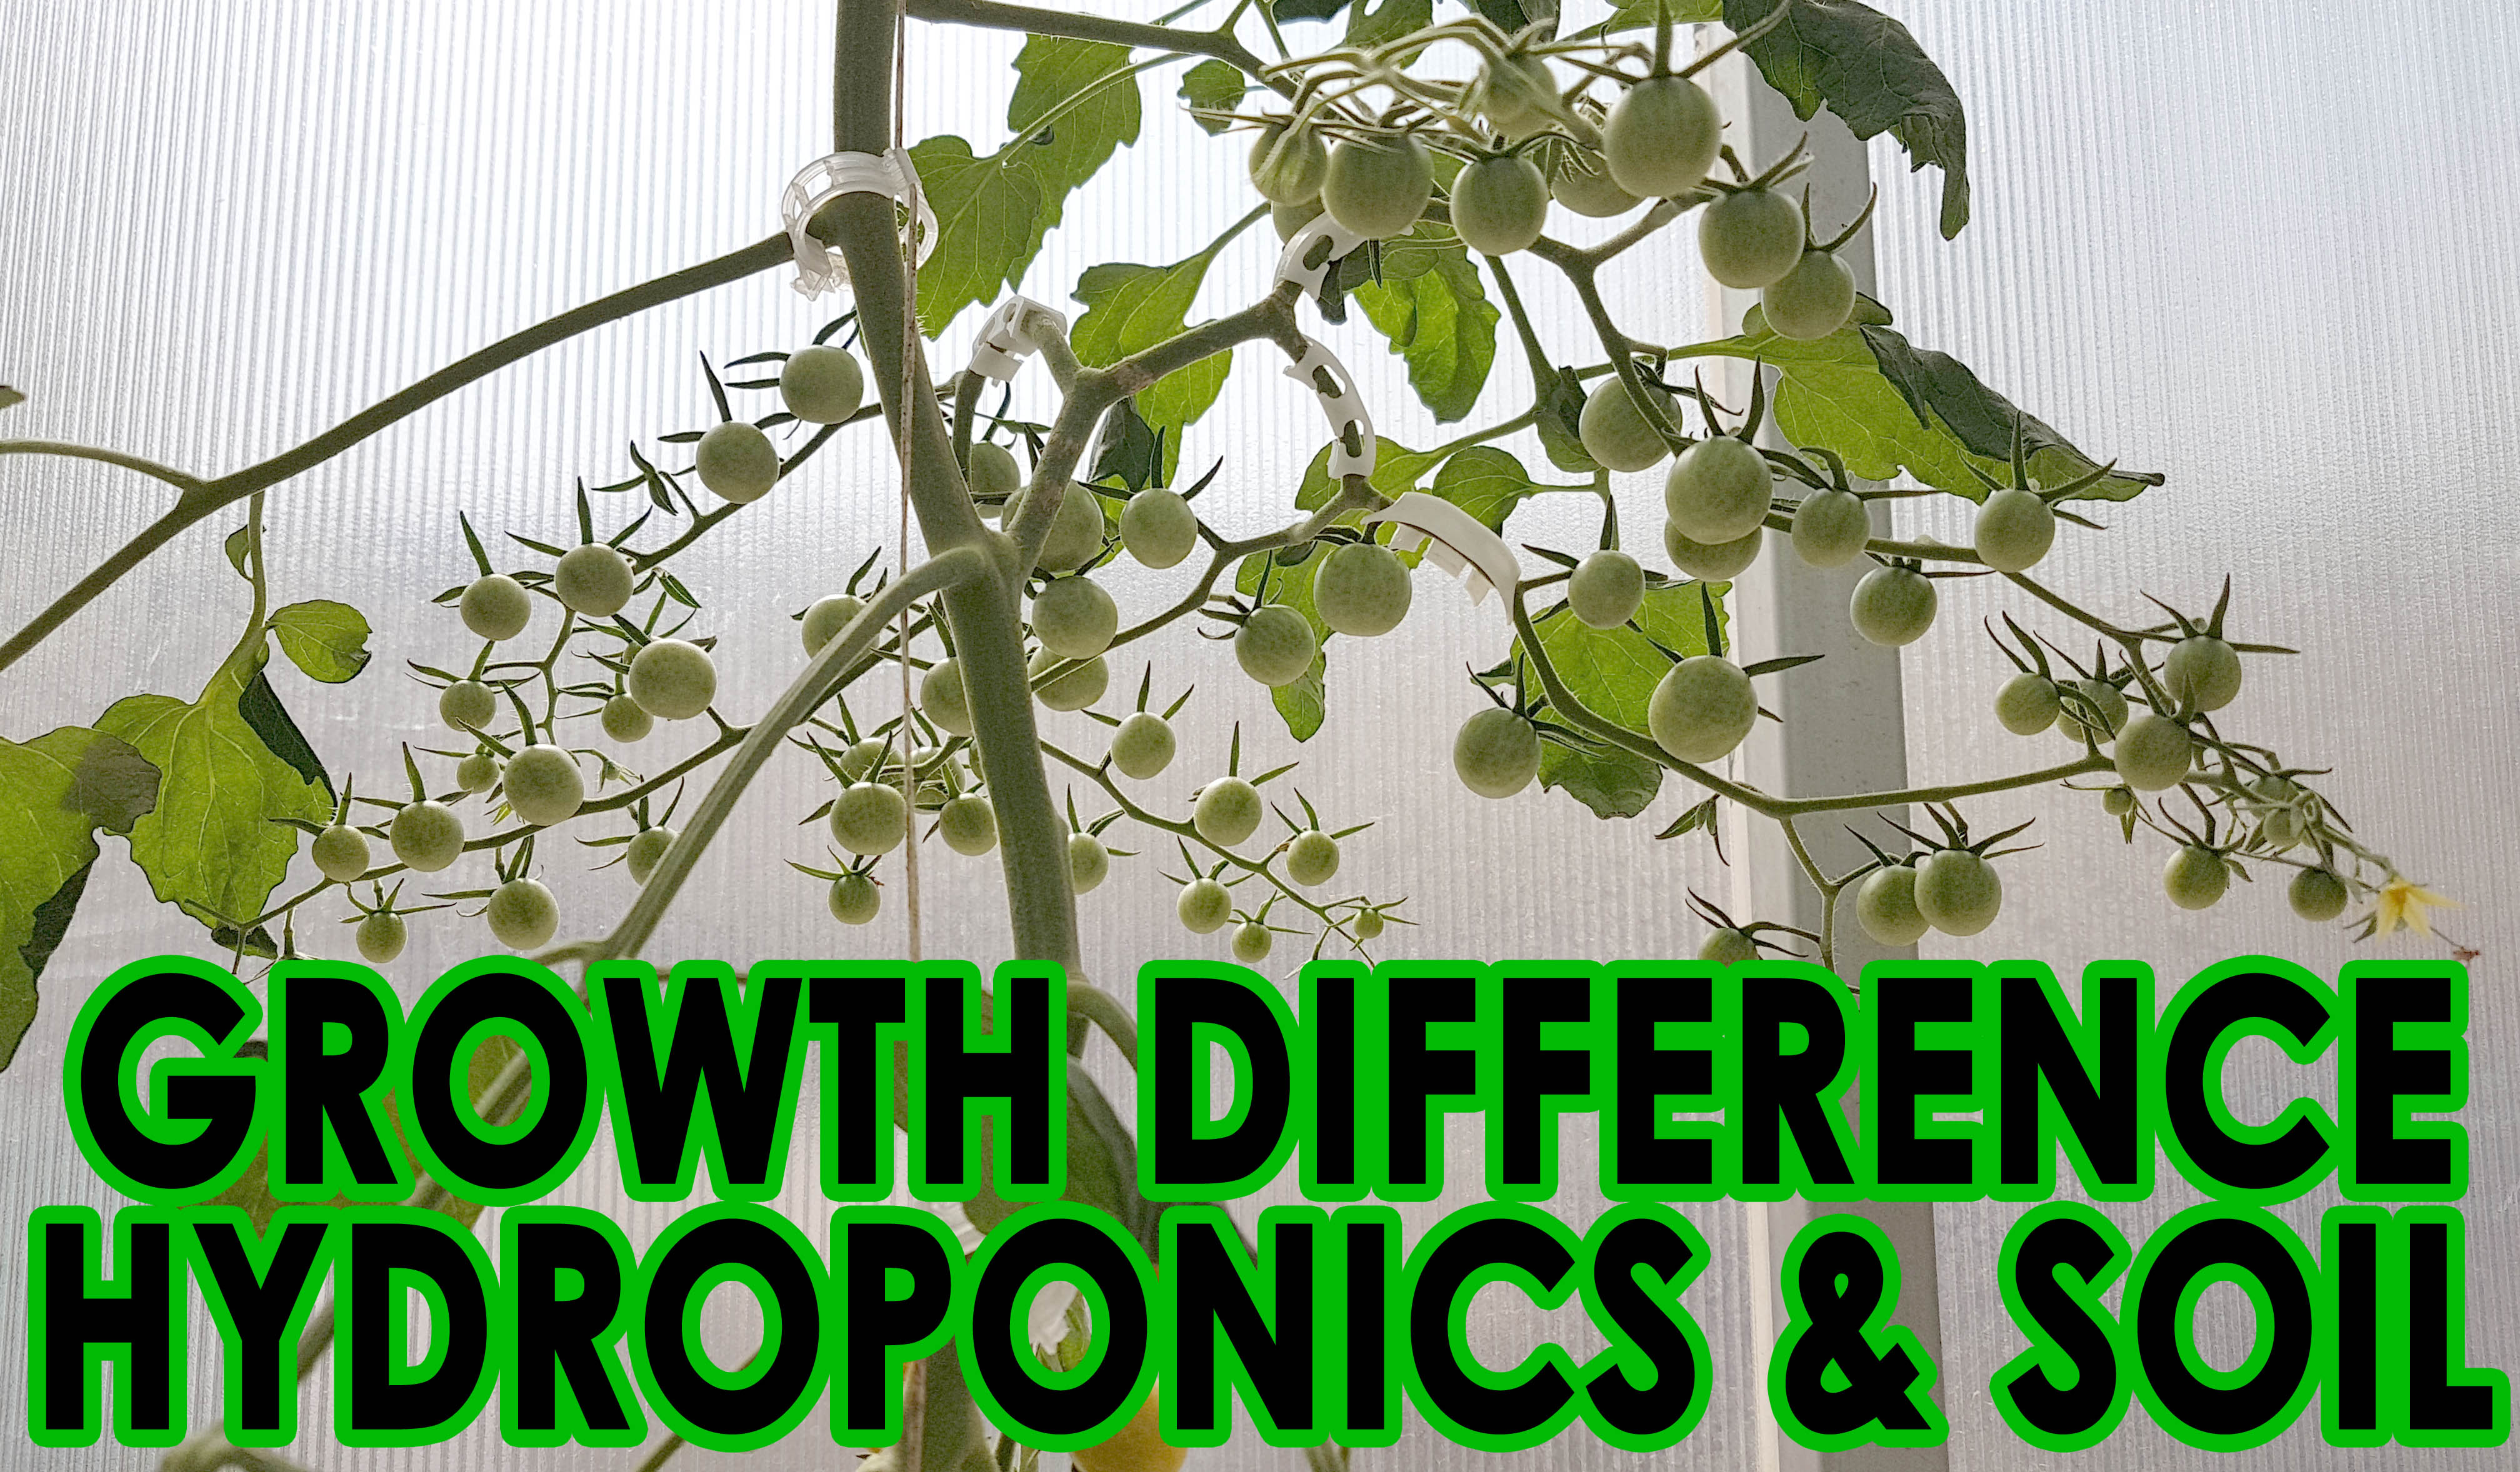 Growth-difference-between-hydroponics-and-soil-PAKISTAN-HYDROPONICS-GREENHOUSE